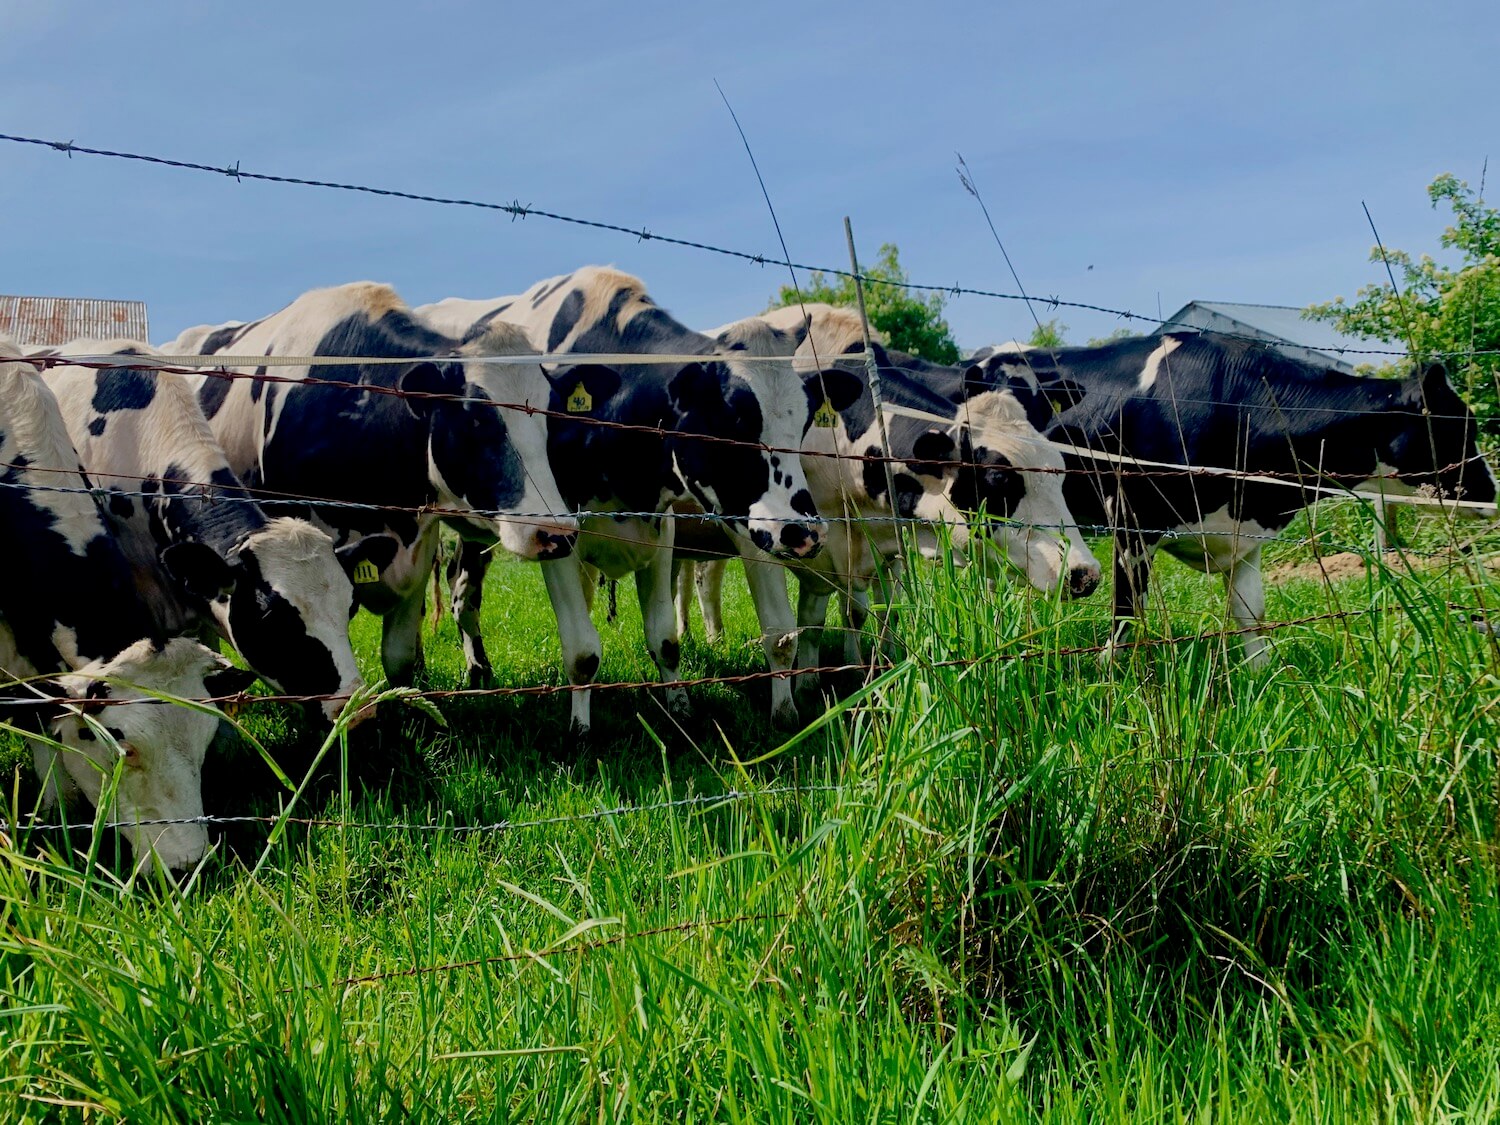 Cows are everywhere in Tillamook, Oregon. These holsteins are black and white with yellow ear tags. They are behind a barbed wire fence and surrounded by lush green blades of grass. The sky is blue in the background.